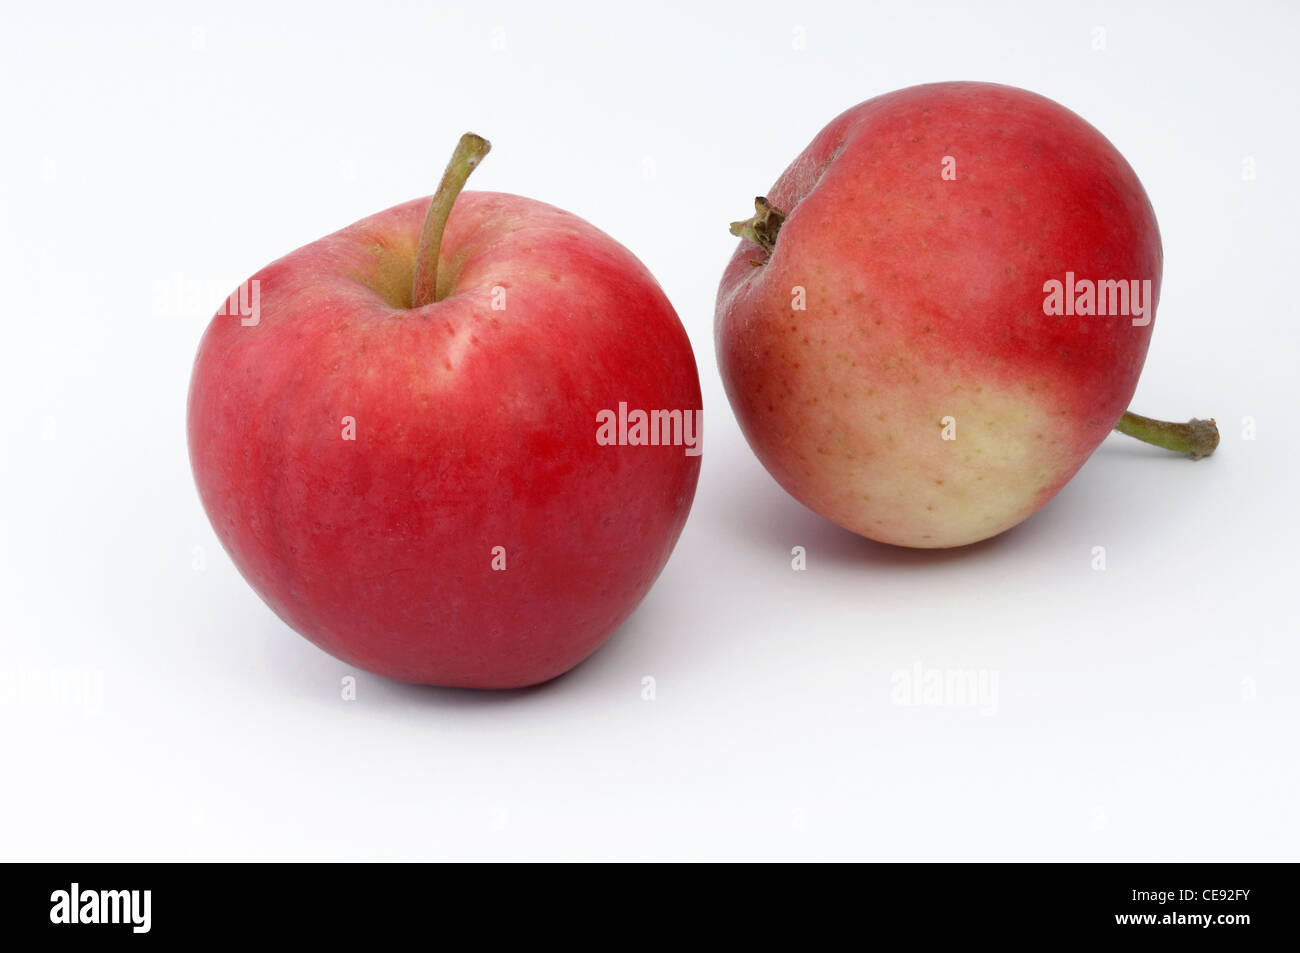 Domestic Apple (Malus domestica), variety: Peach Red Summer Apple. Two apples, studio picture against a white background. Stock Photo